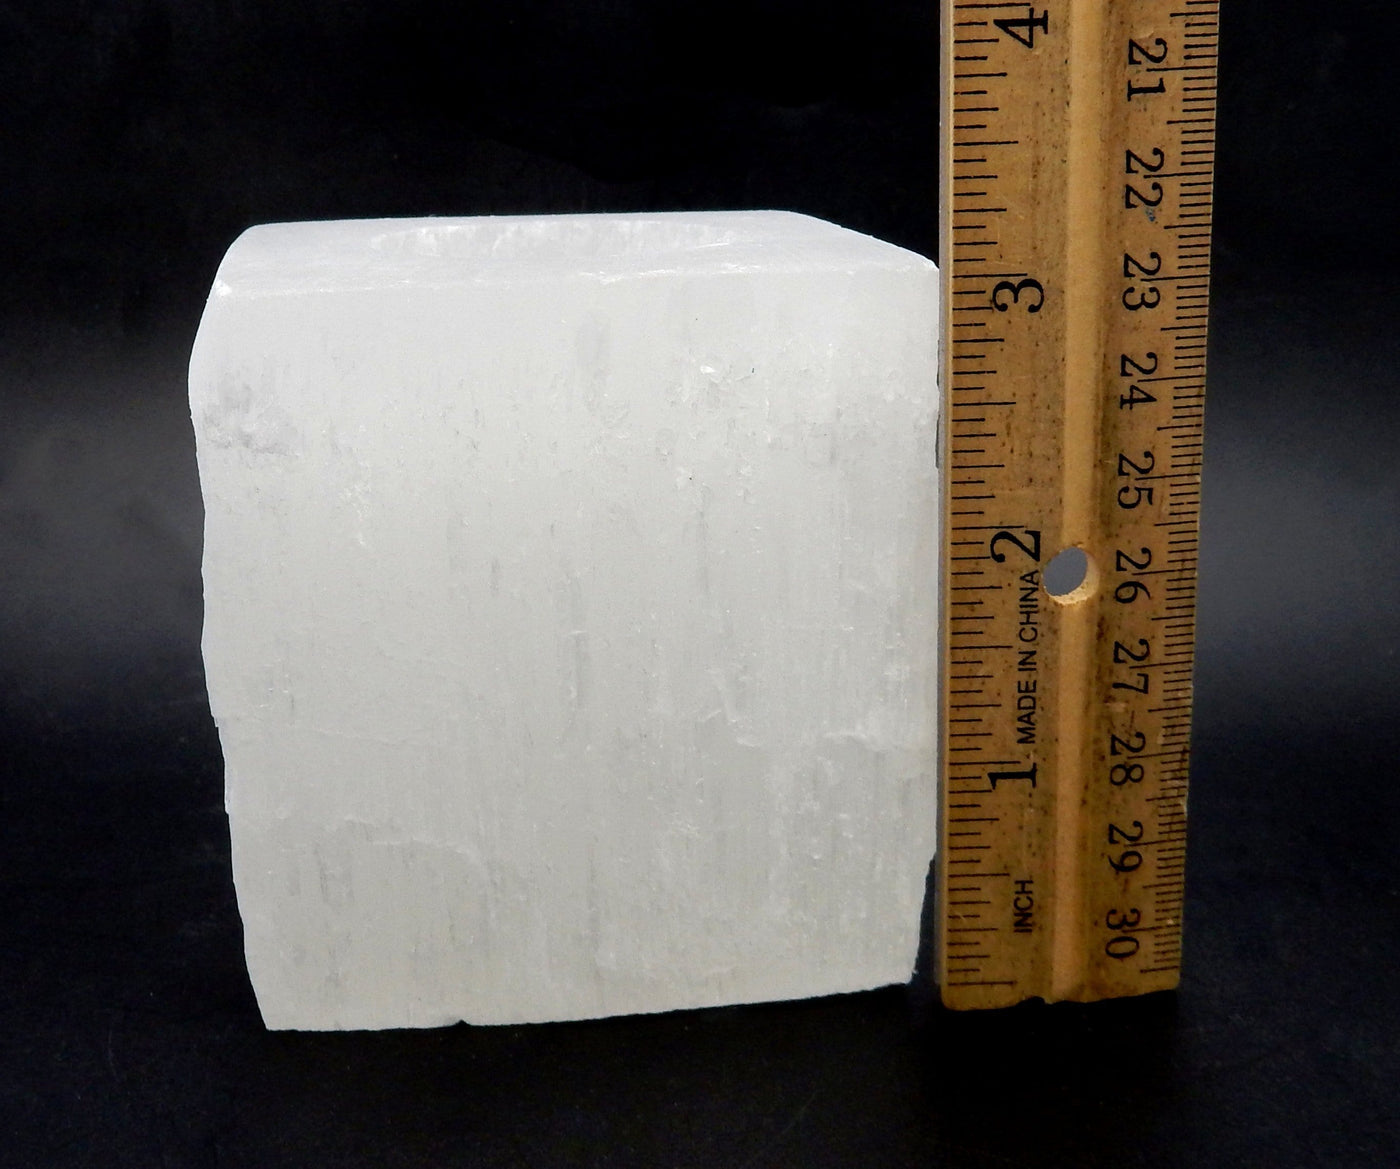 Single Square Shaped Selenite Candle Holder next to a ruler for size comparison 